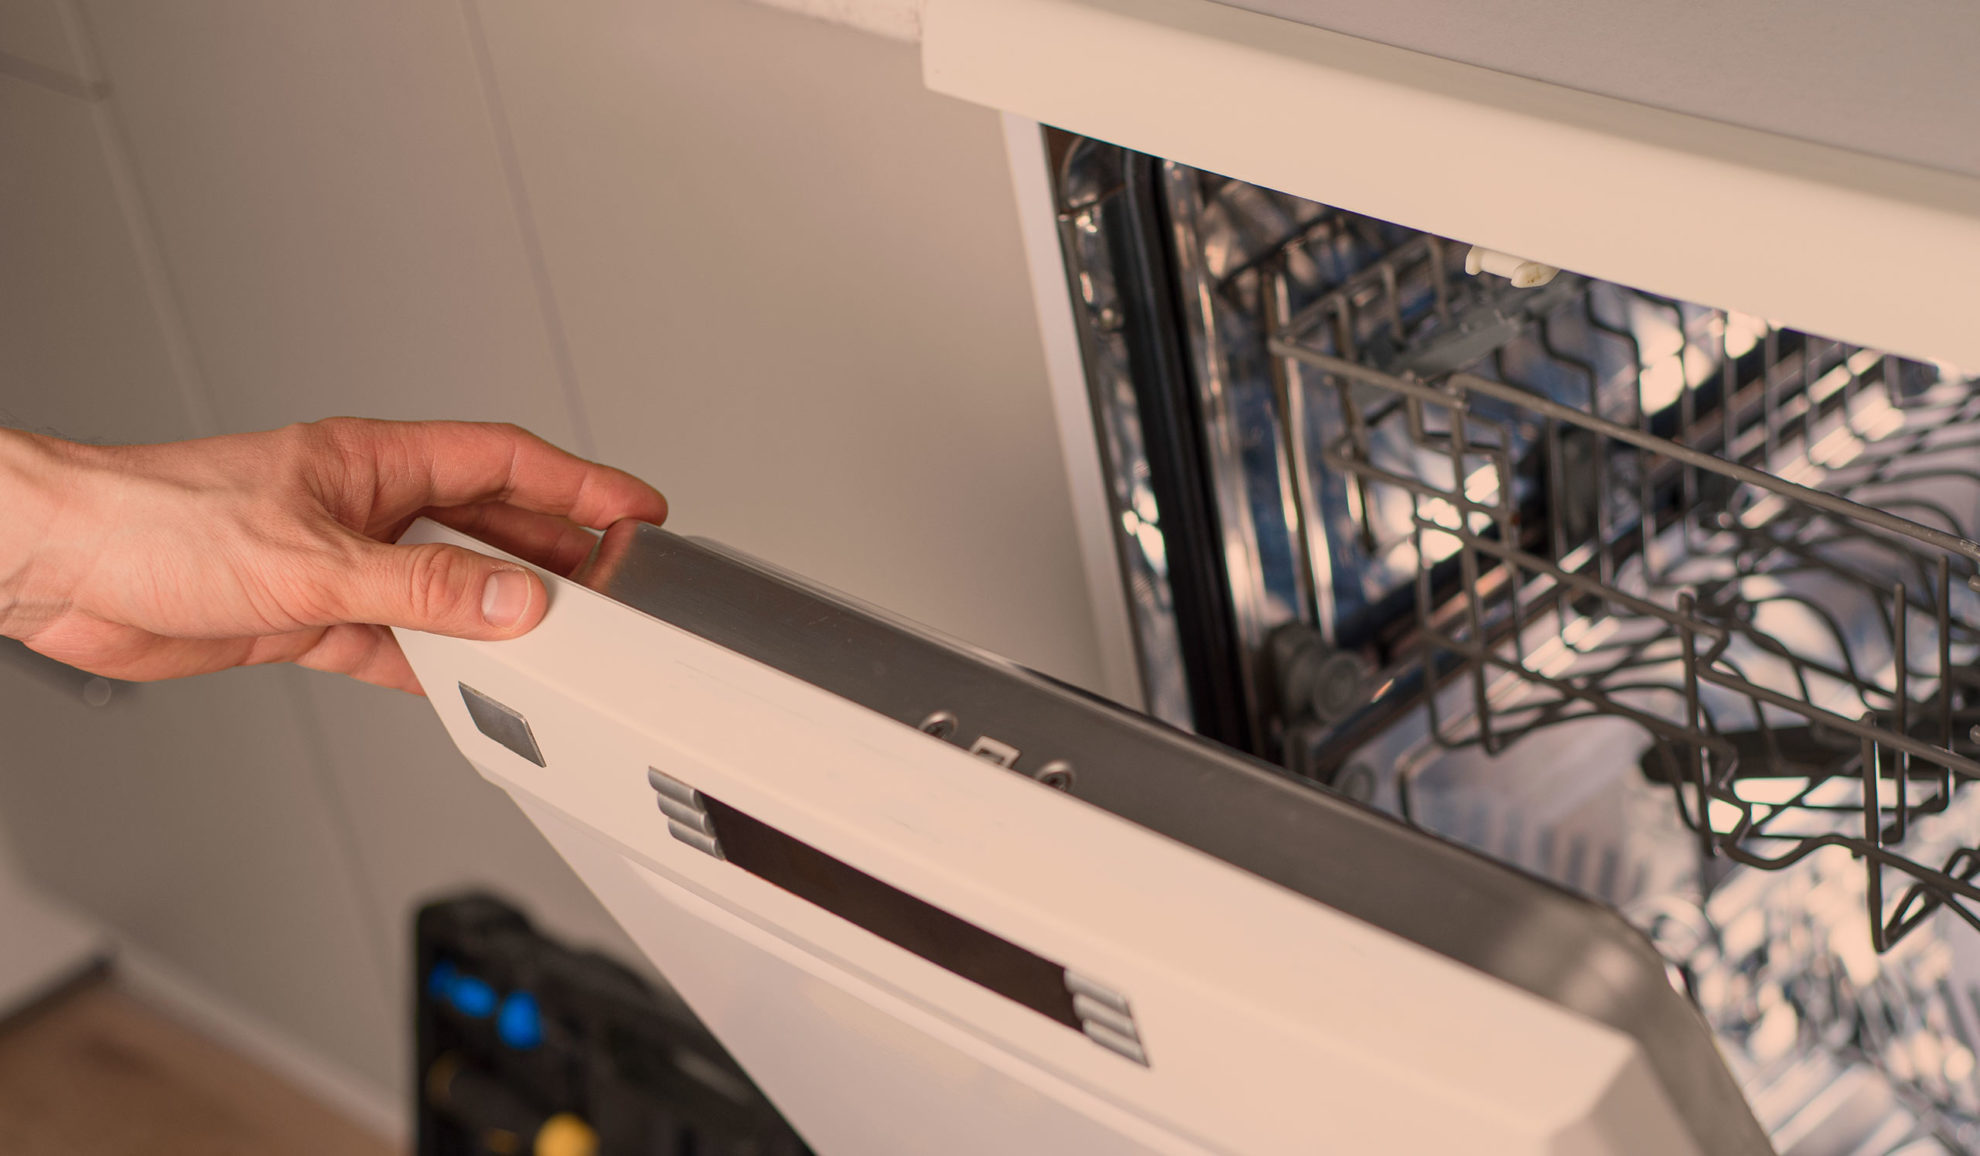 technician-hand-close-up-holding-dishwasher-door-opened-after-repairing-fort-collins-co